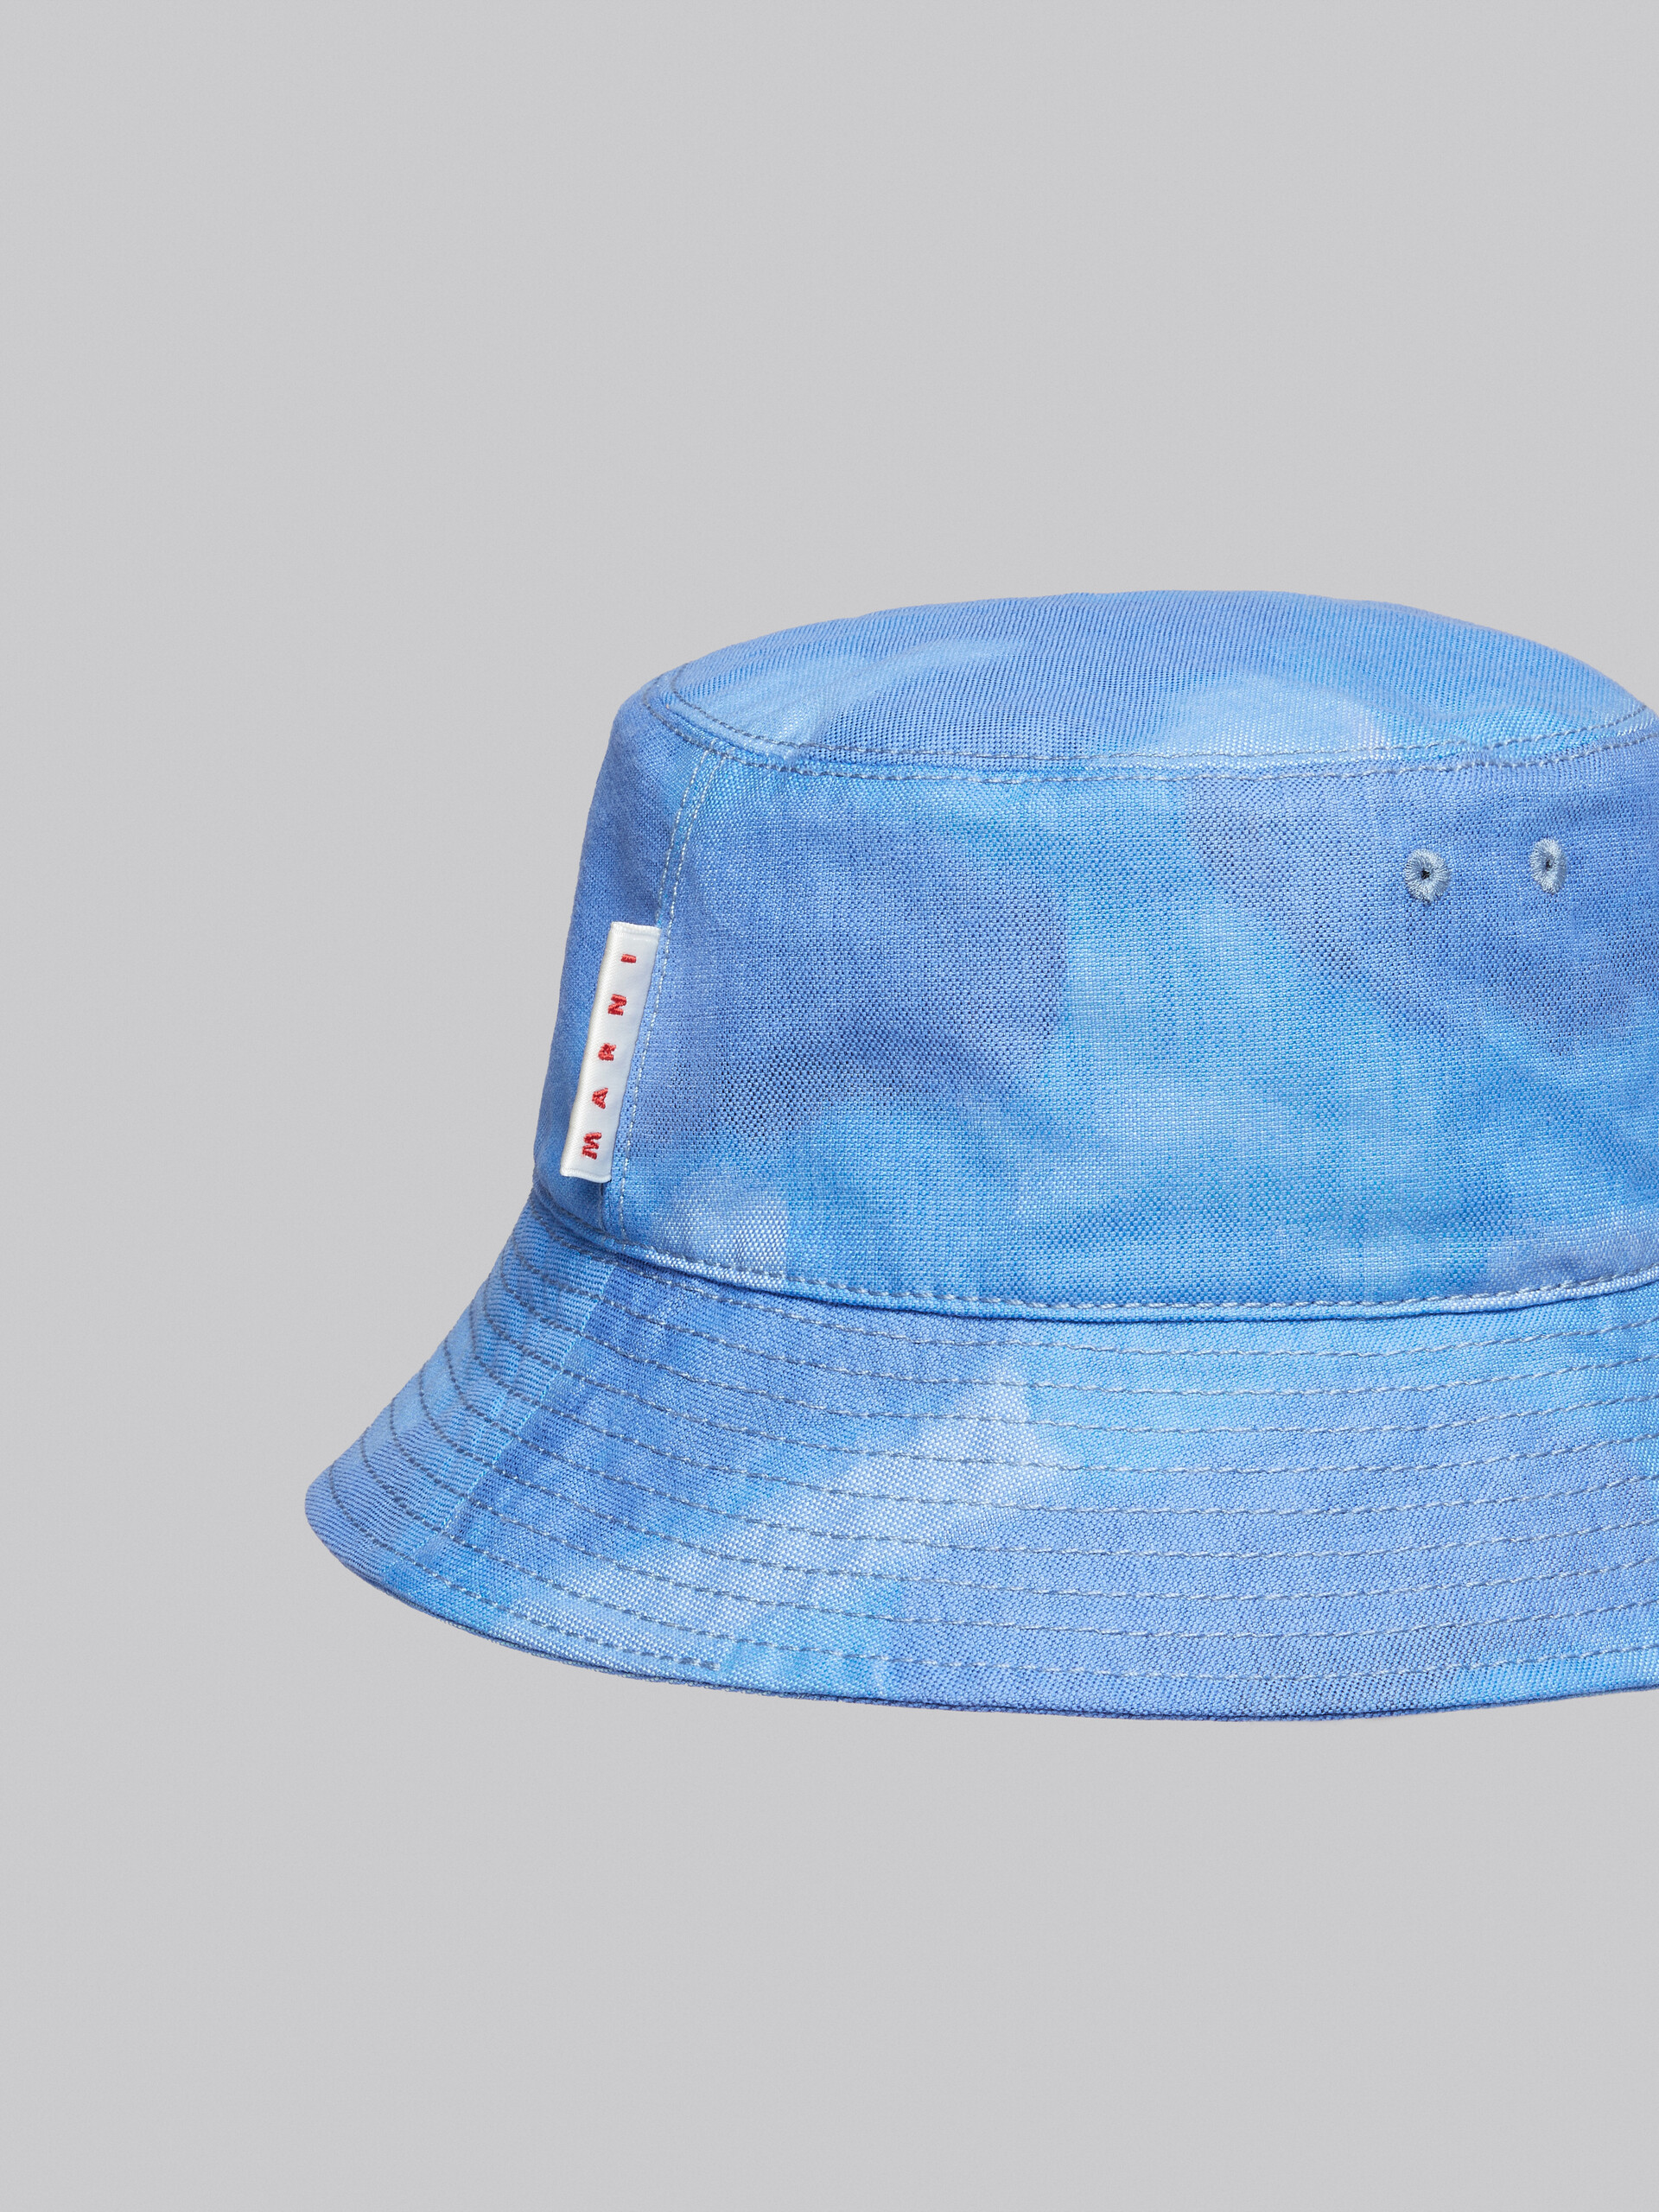 Bucket hat in canvas with light blue Clouds motif - Hats - Image 4